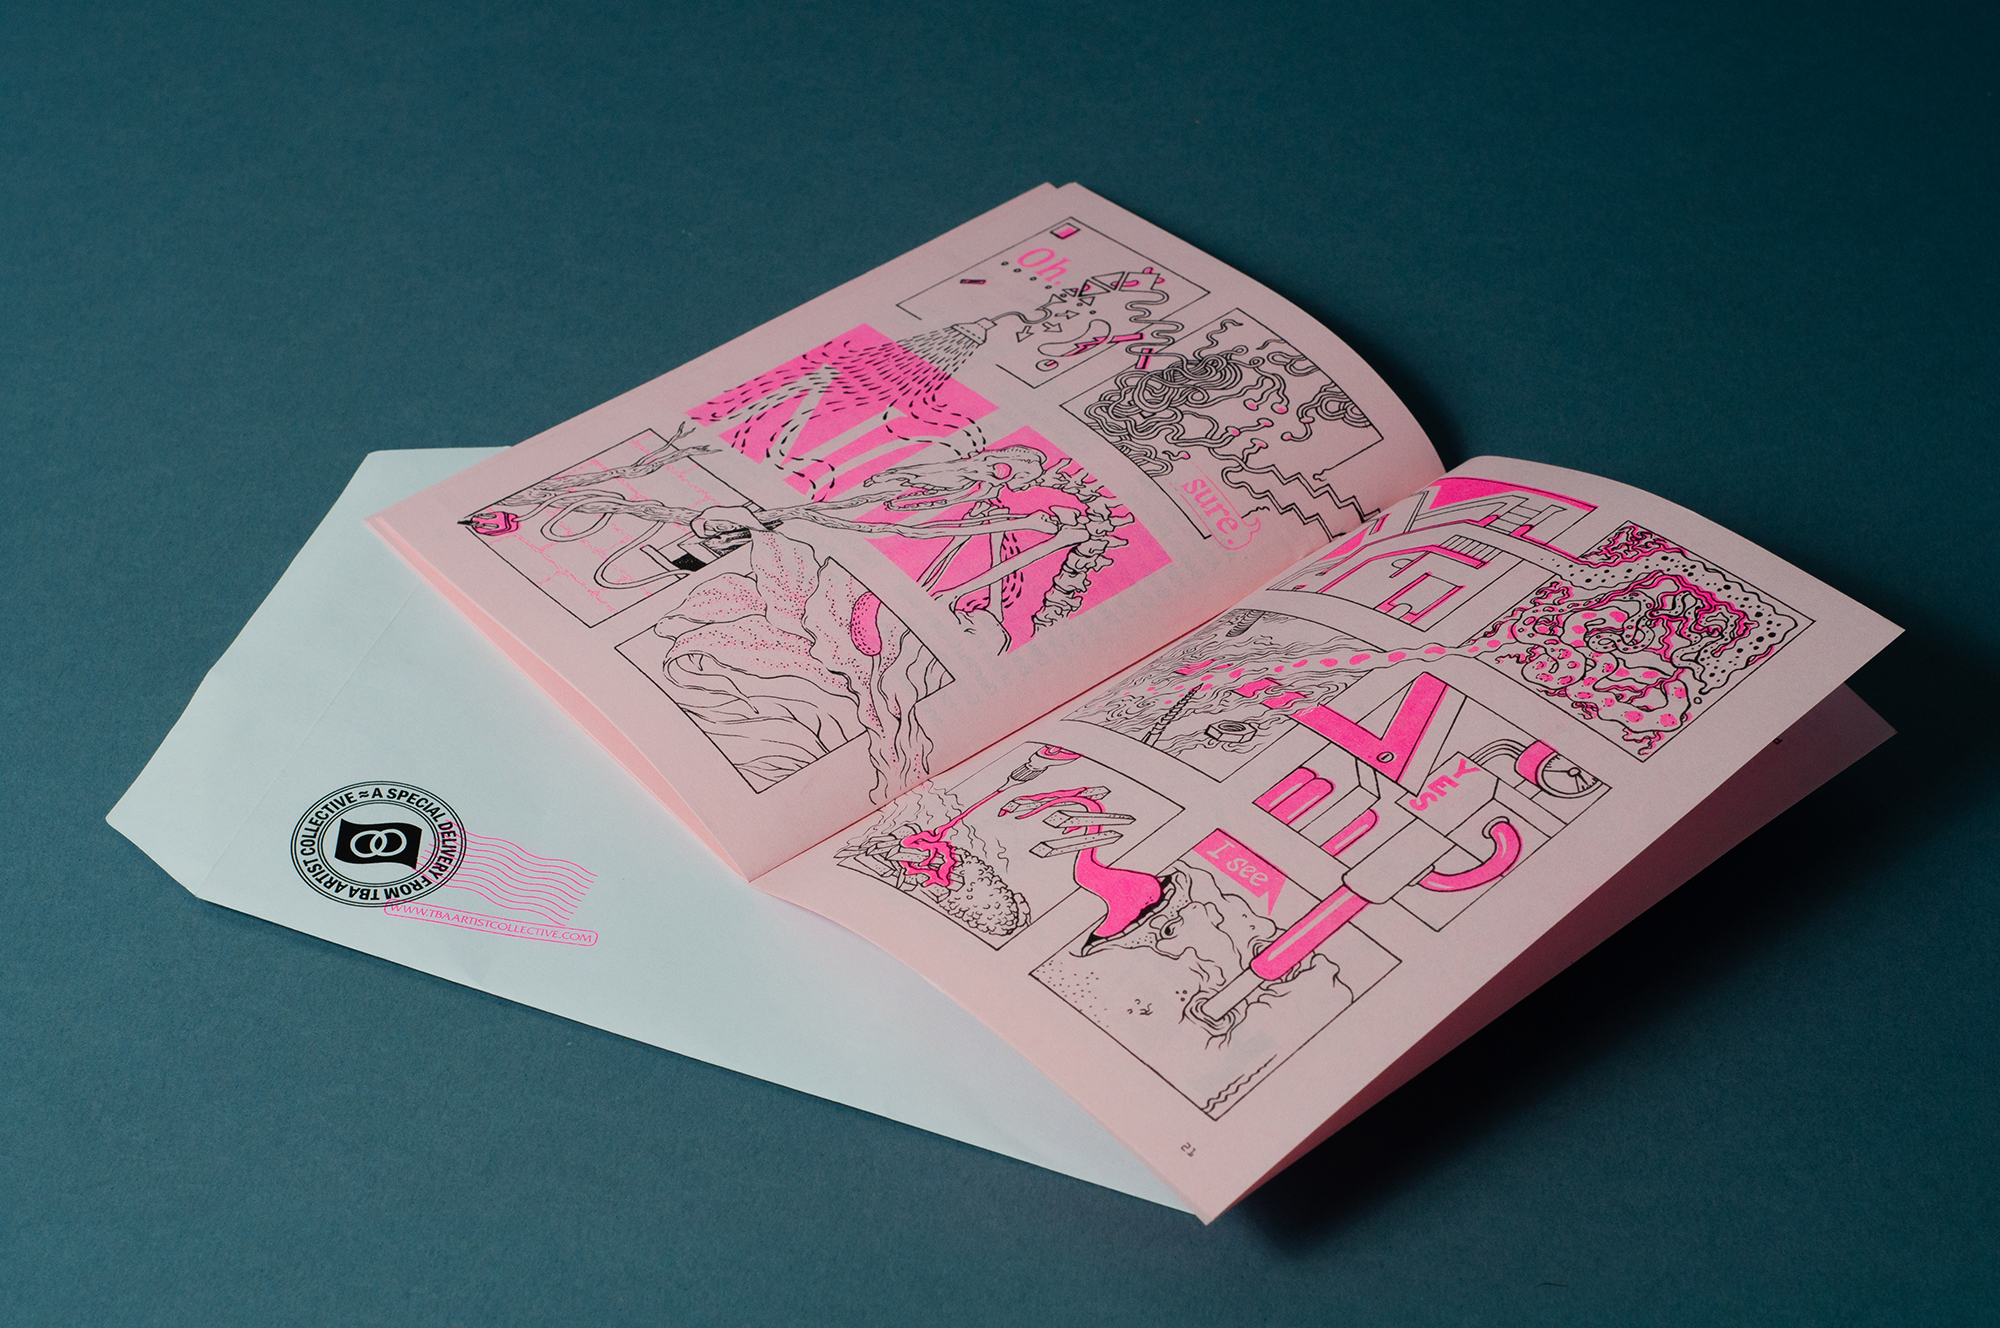 A photograph of a risograph printed zine for TBA Artist Collective